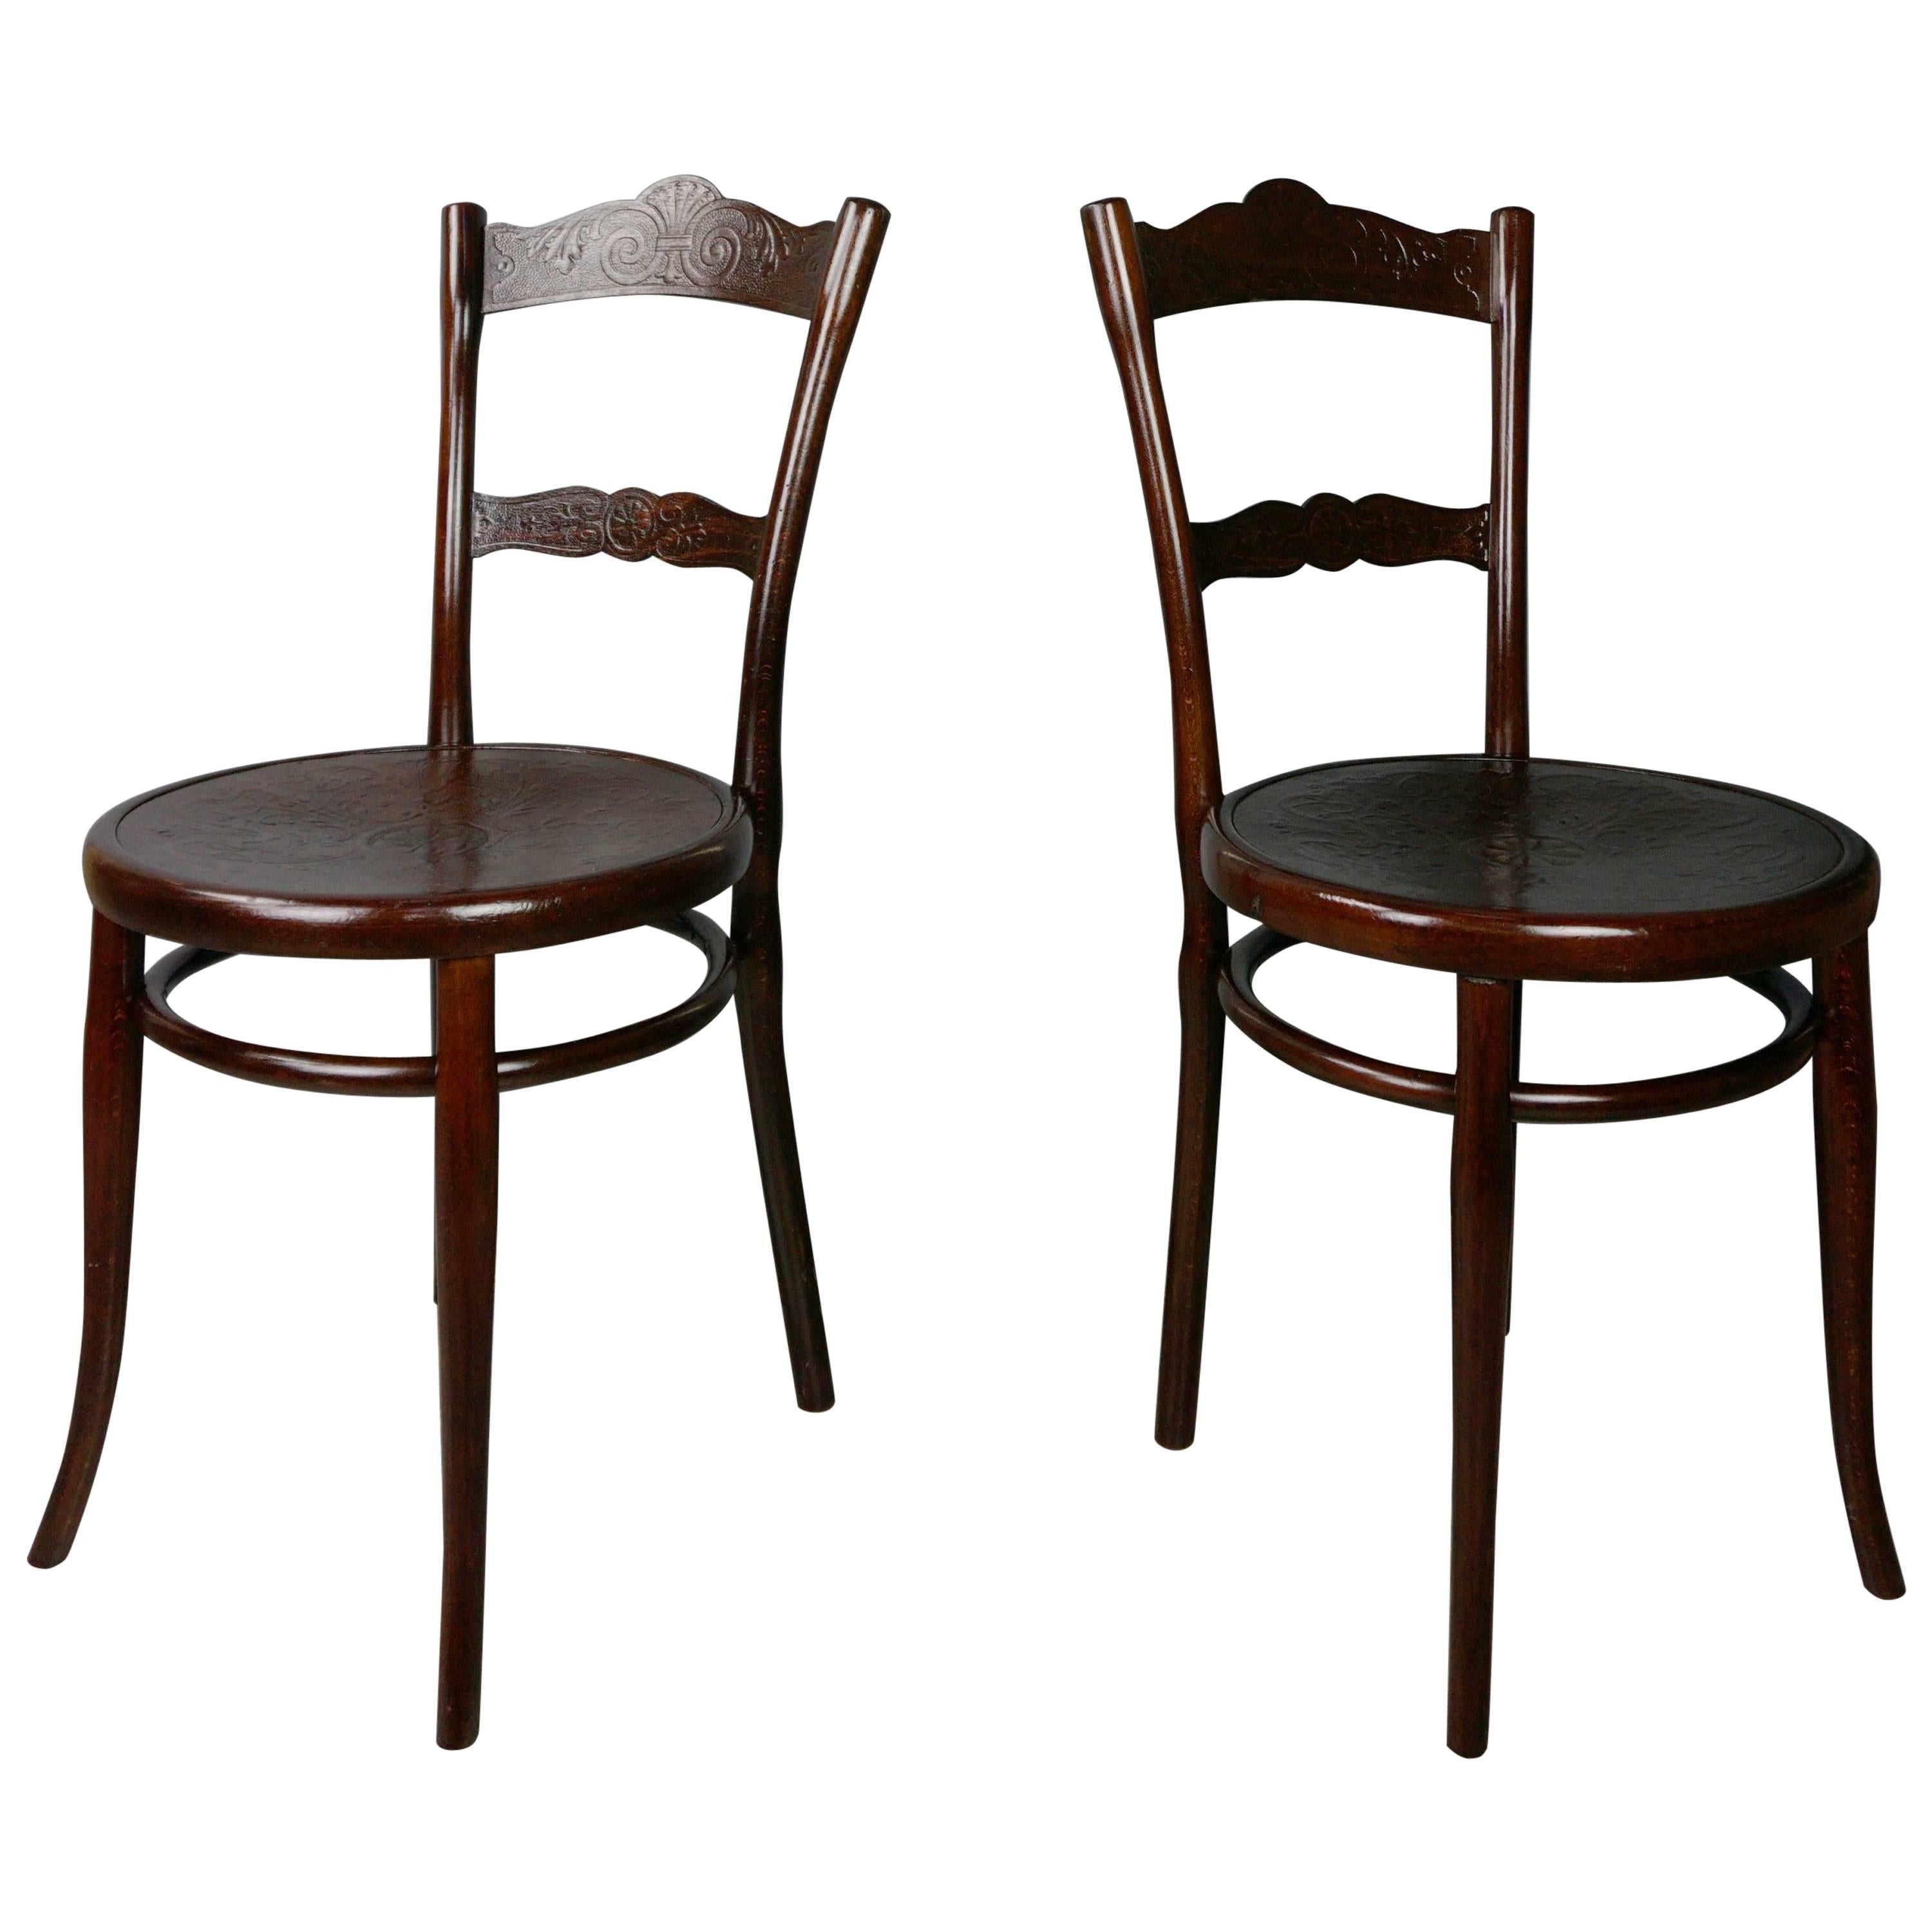 Pair of Bentwood Thonet Chairs from the Beginning of the 20th Century